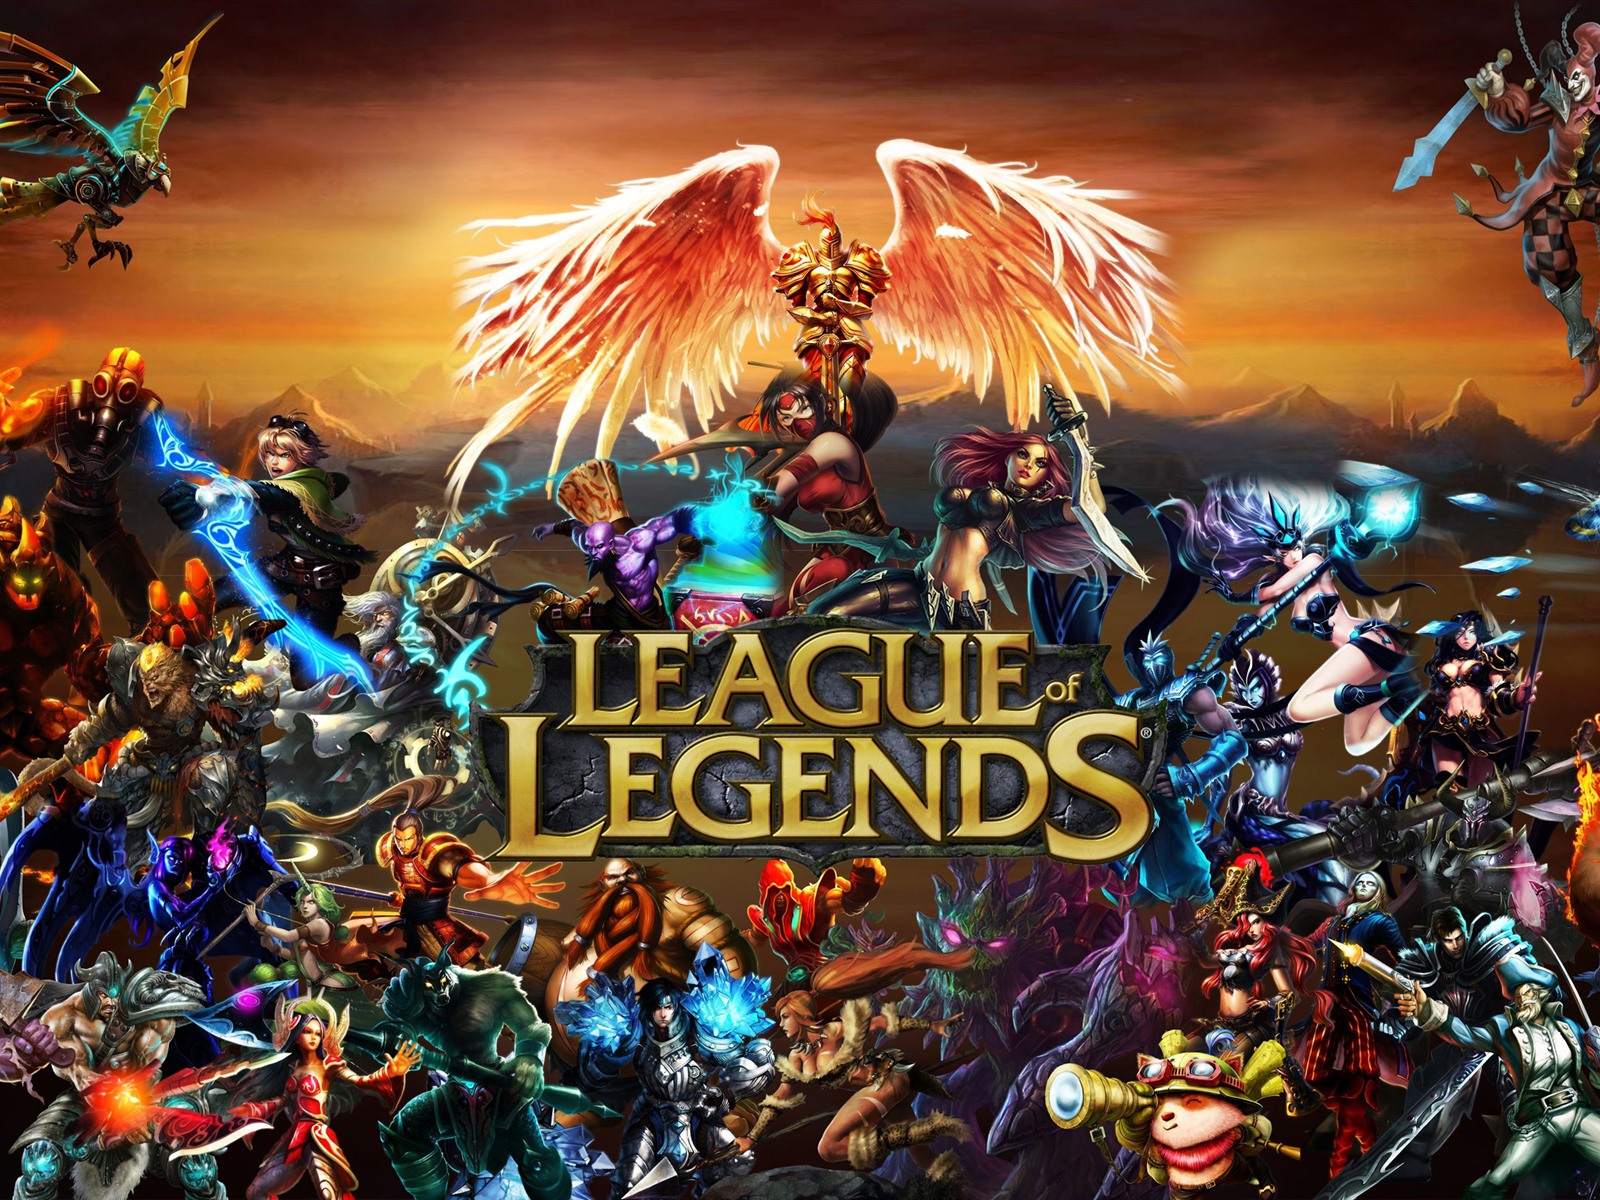 League of Legends game HD wallpapers #1 - 1600x1200